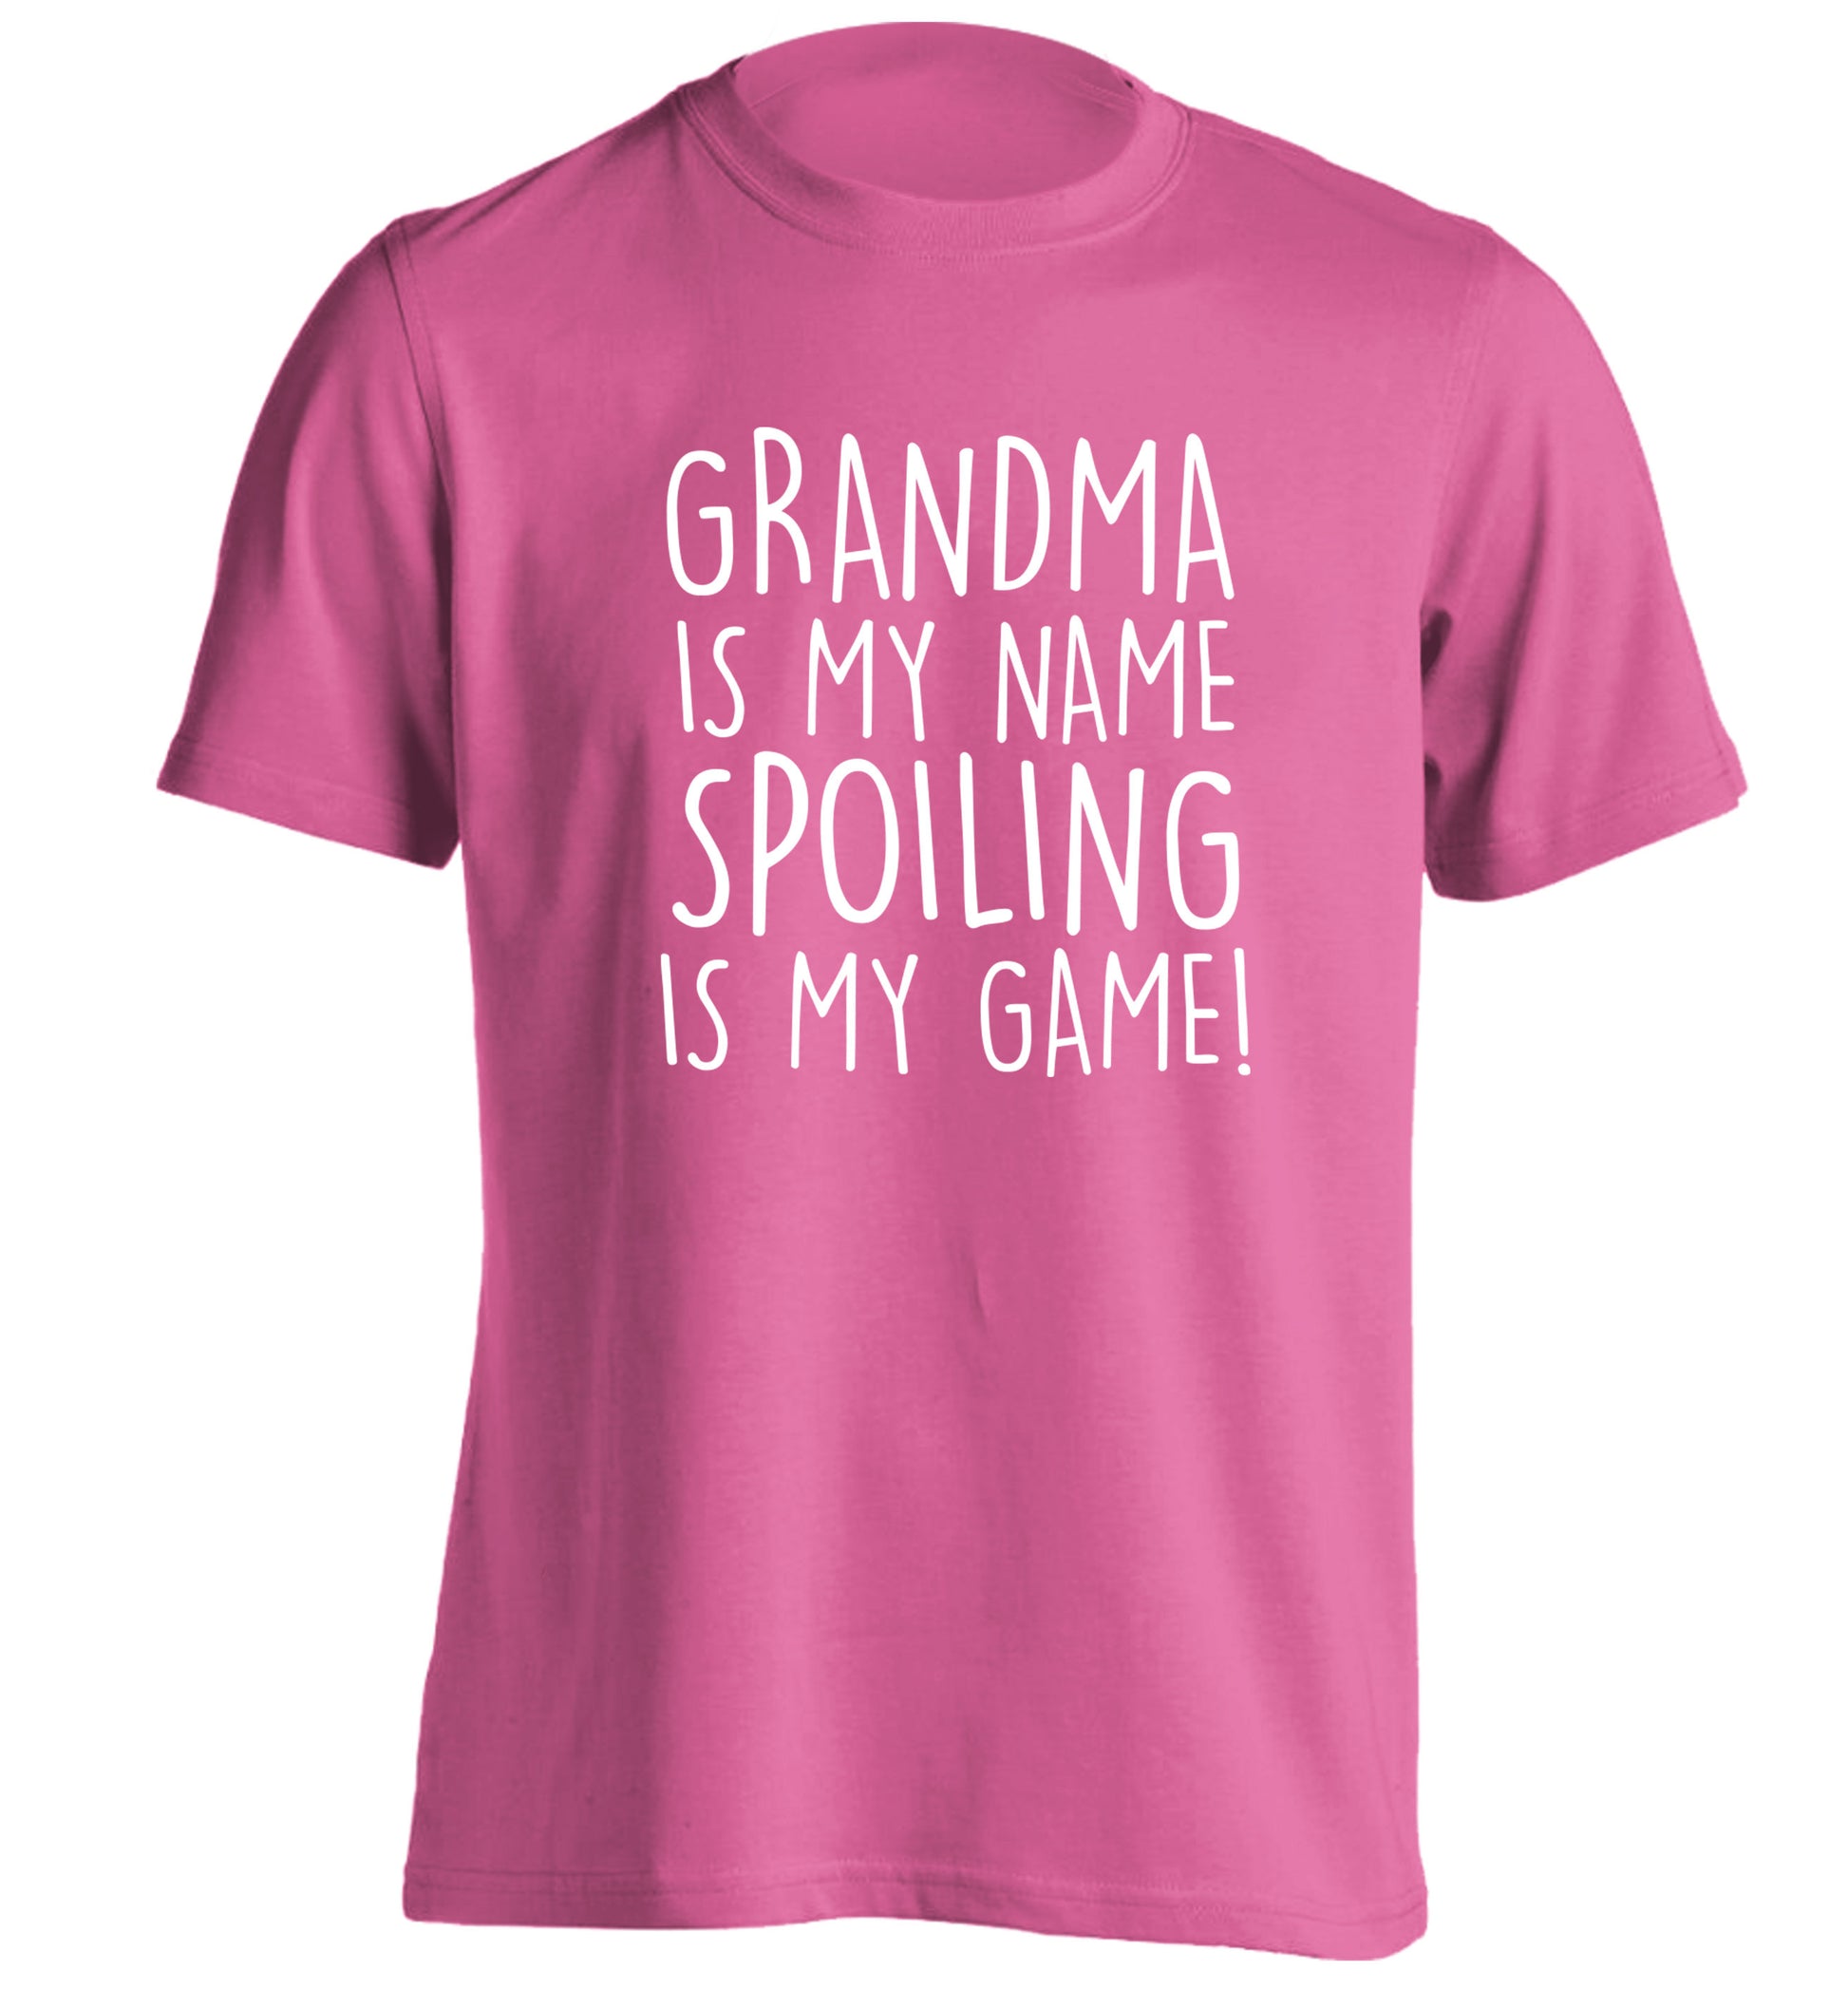 Grandma is my name, spoiling is my game adults unisex pink Tshirt 2XL